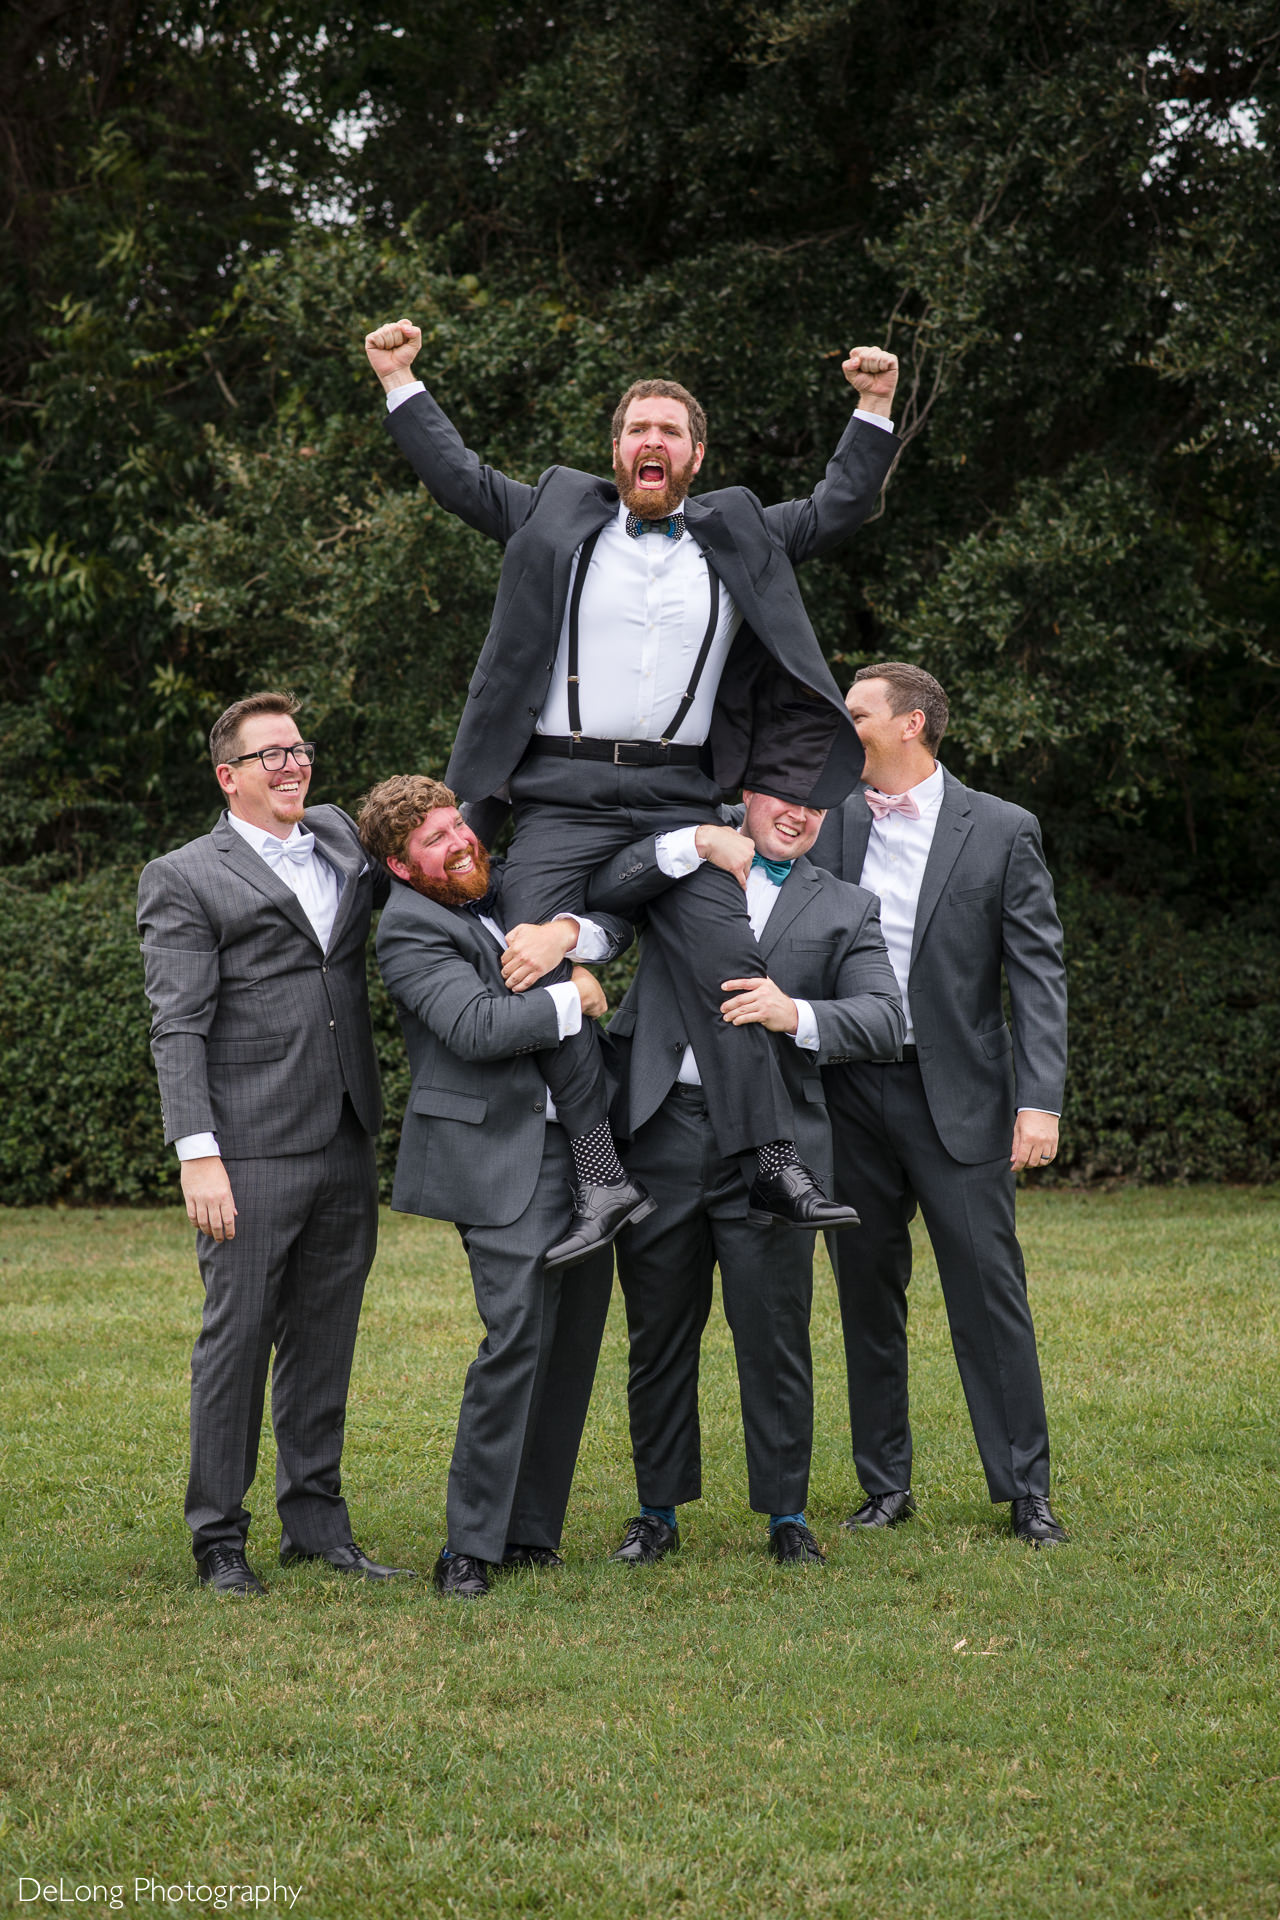 Groom being hoisted up by groomsmen on the lawn at the Island House in Charleston, SC by Charlotte Wedding Photographers DeLong Photography